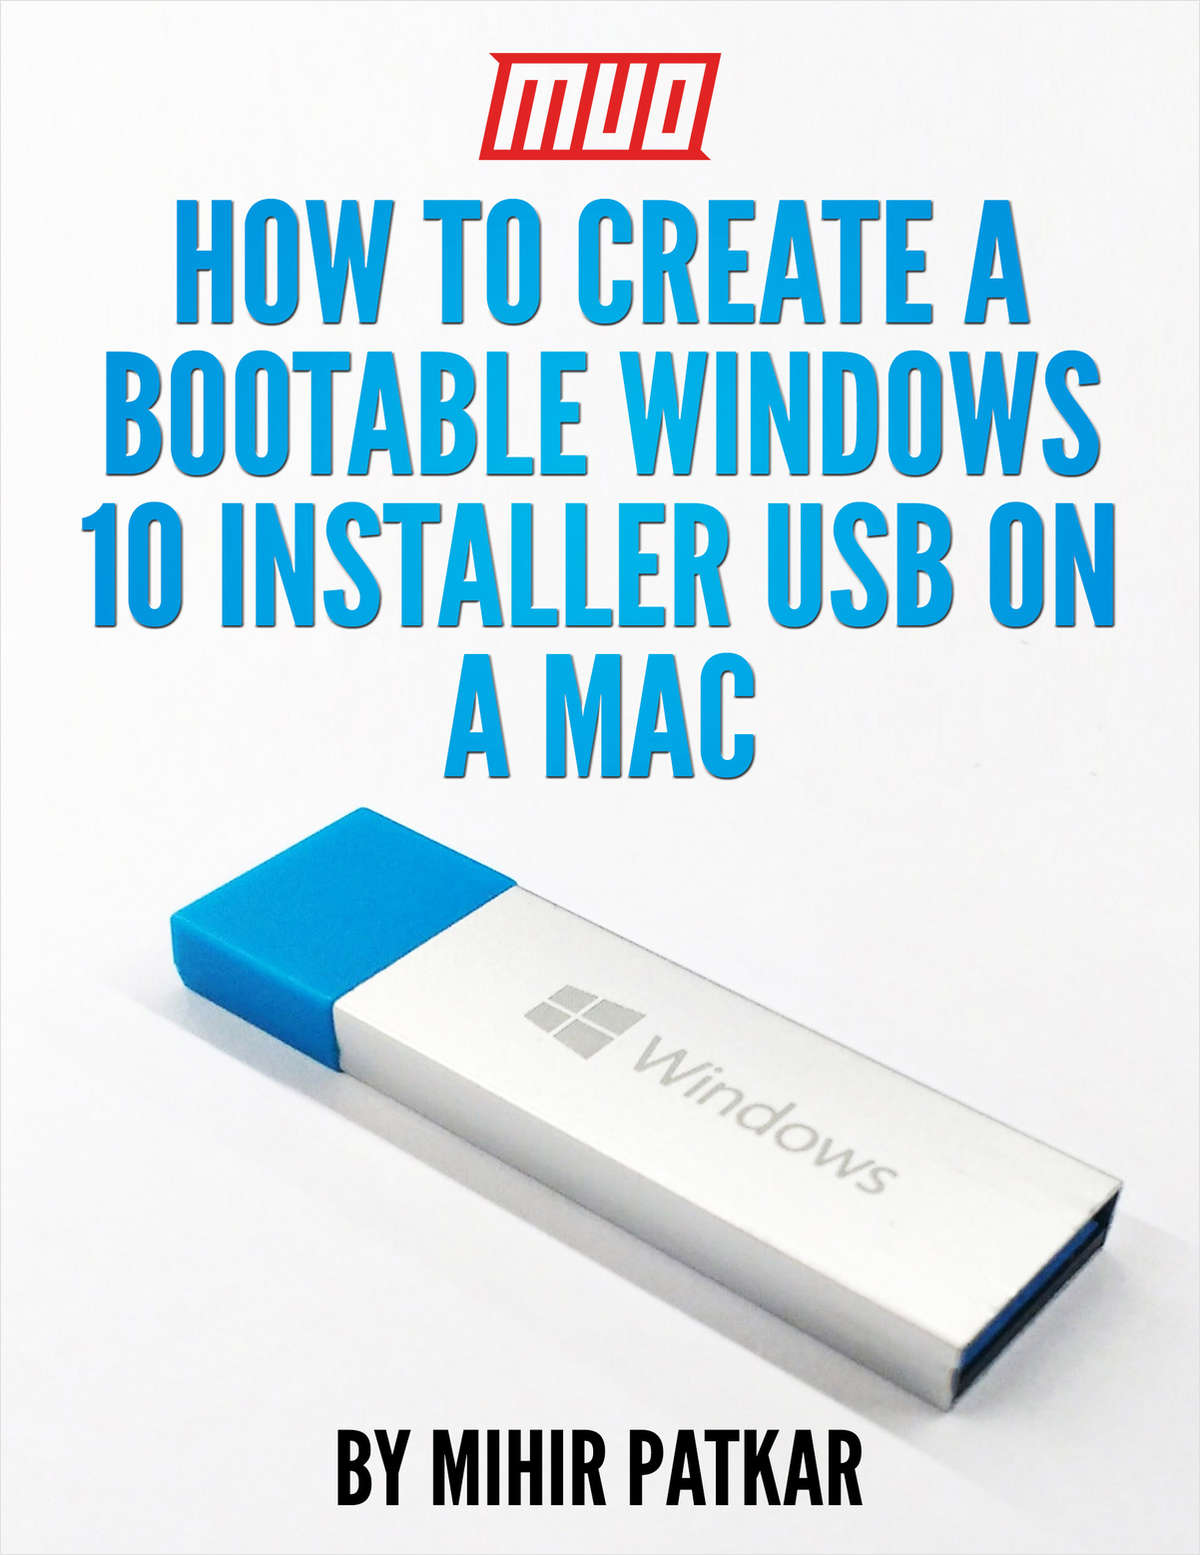 booting imac from usb